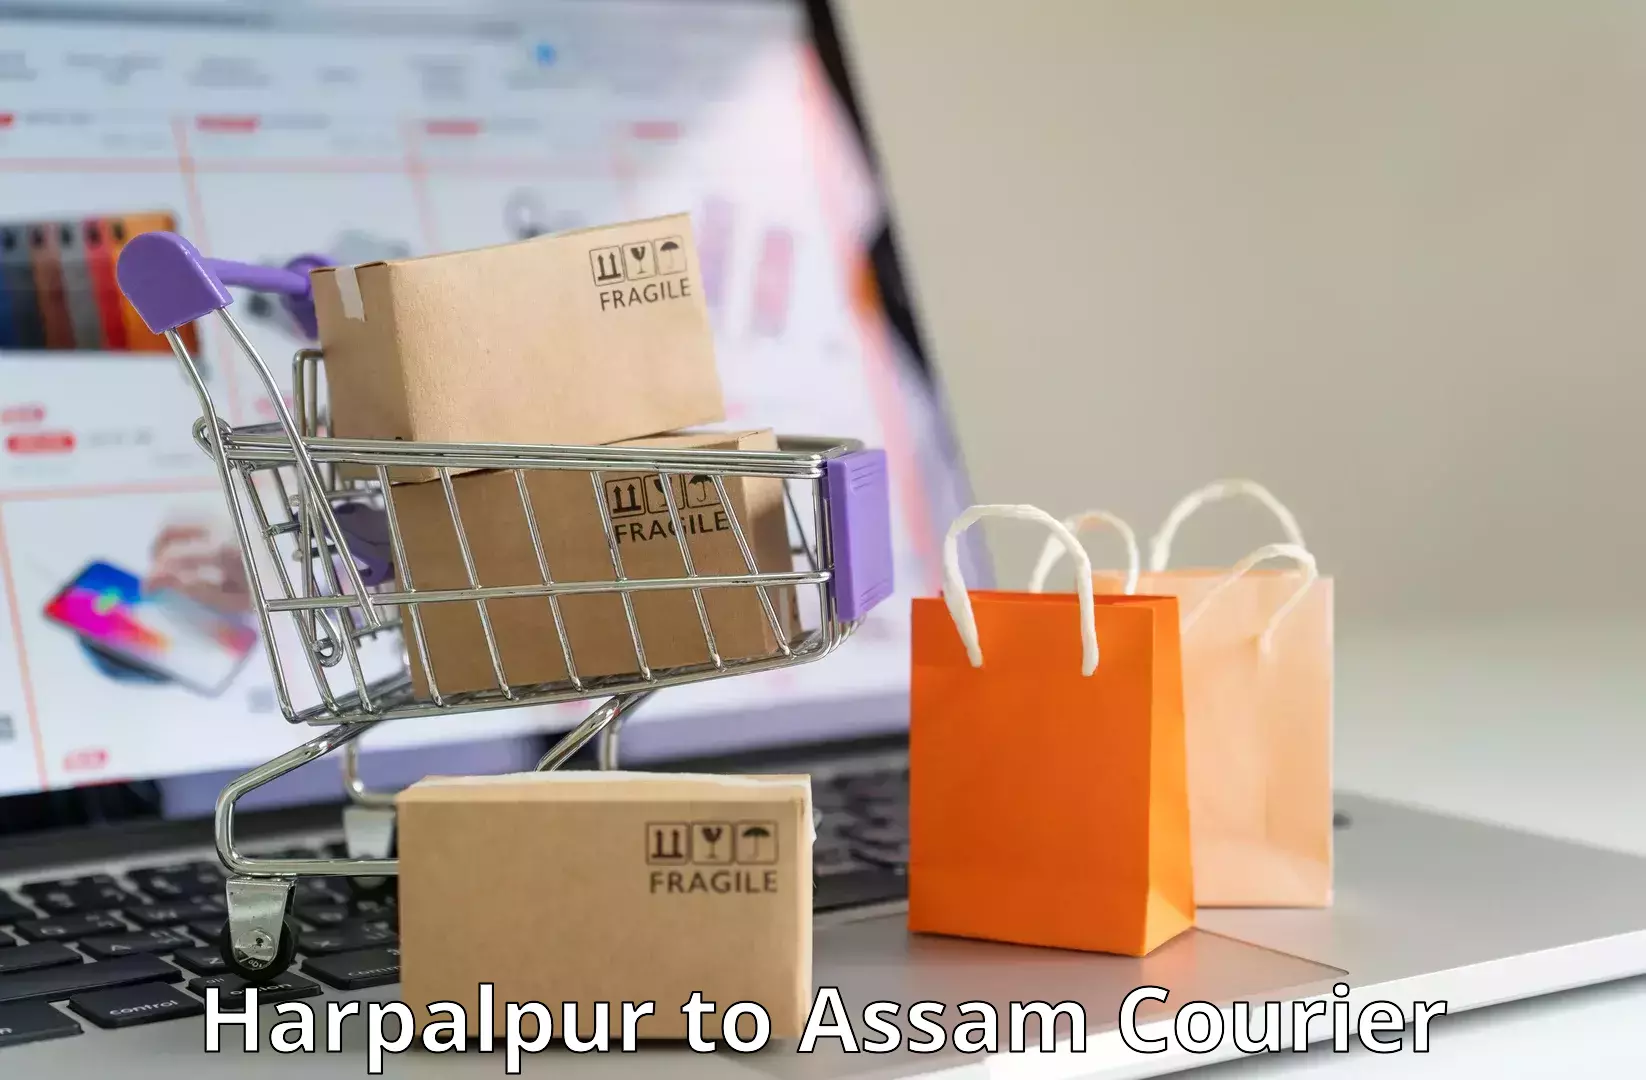 Urgent courier needs Harpalpur to Silapathar